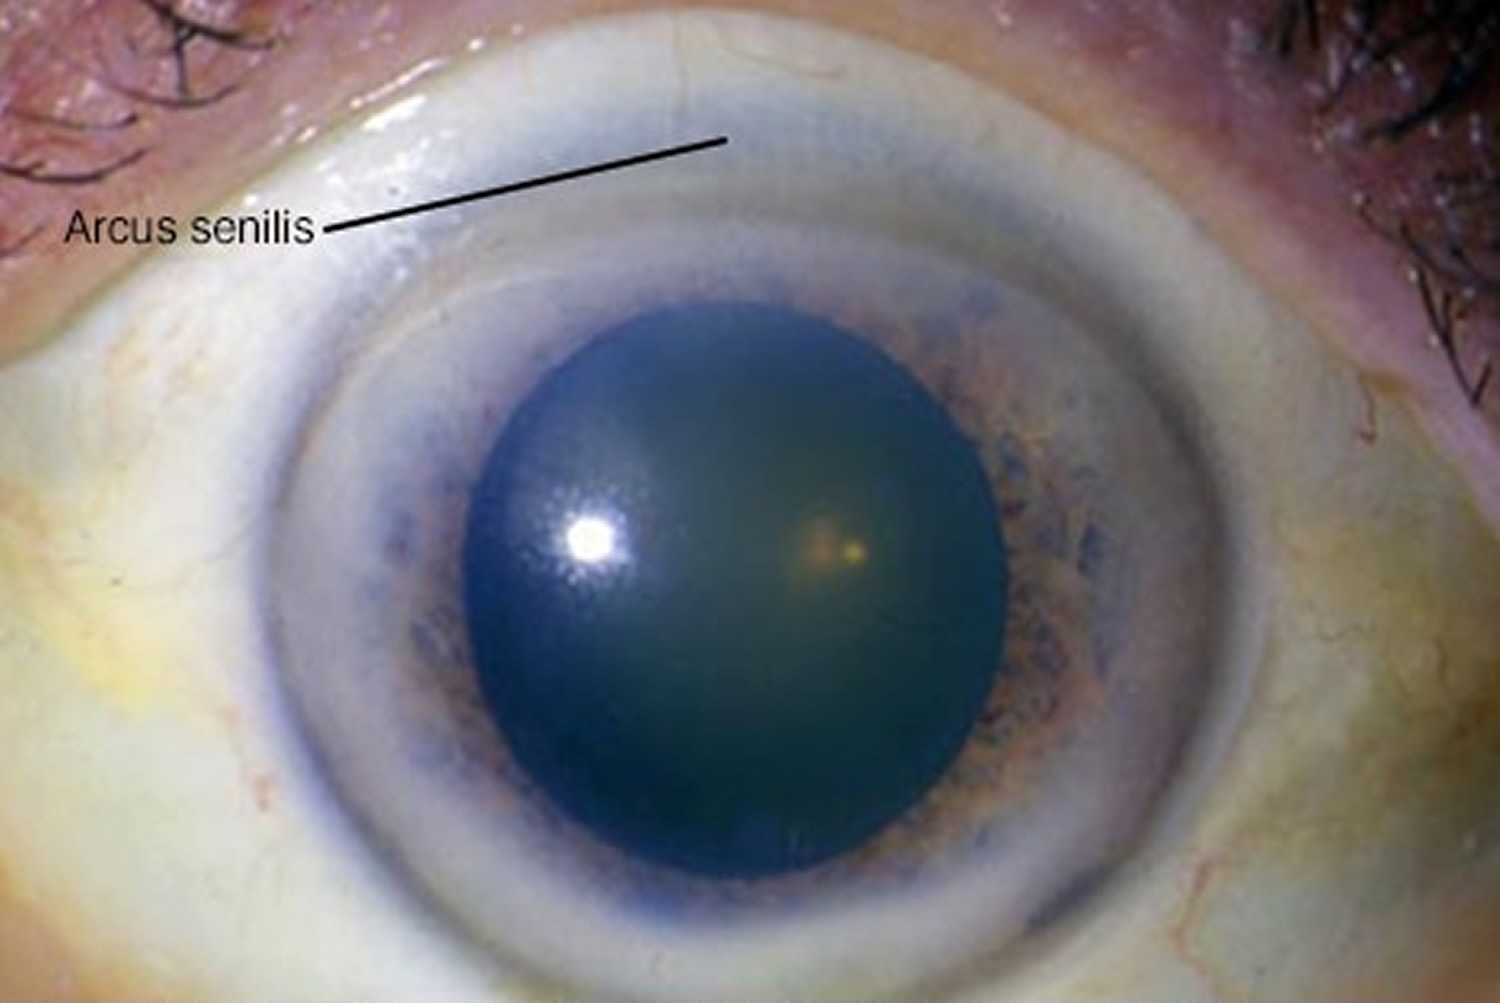 There is ring around my iris - fat deposits and lipid build up